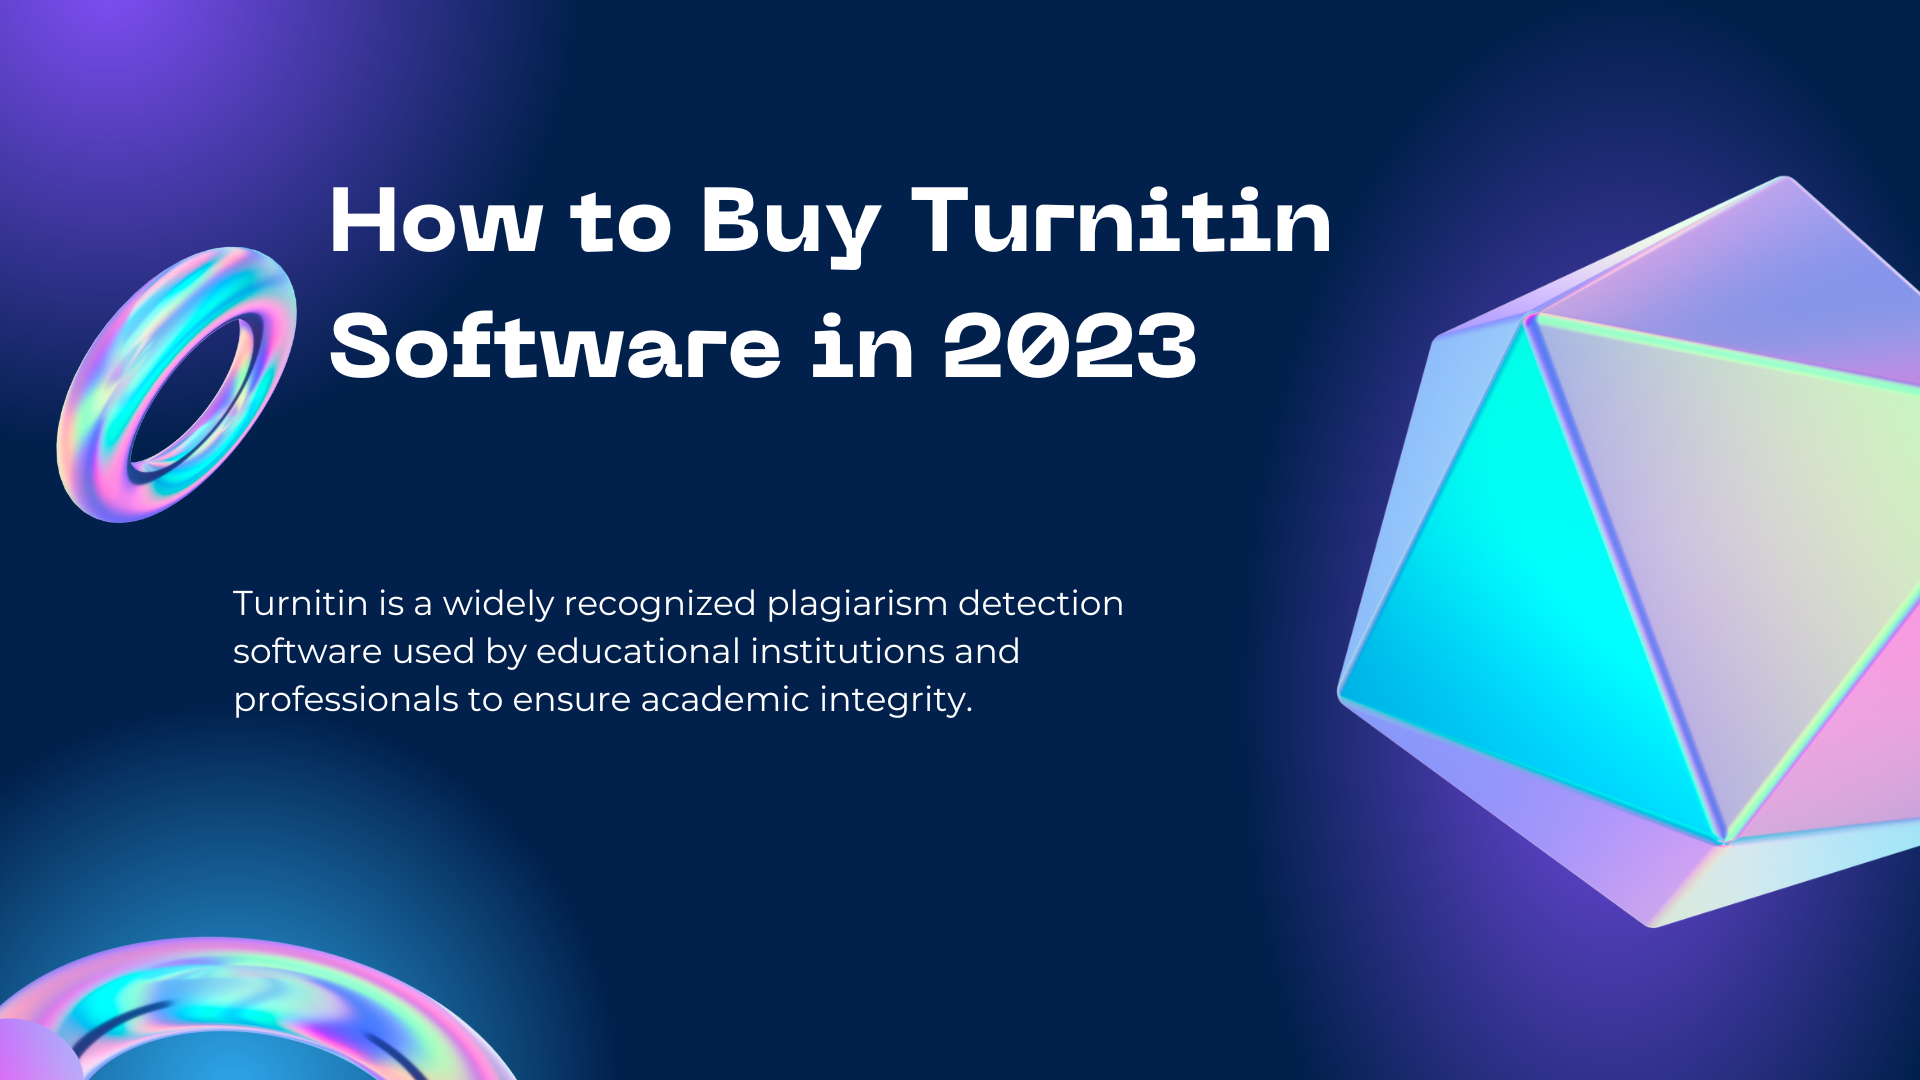 How to Buy Turnitin Software in 2023